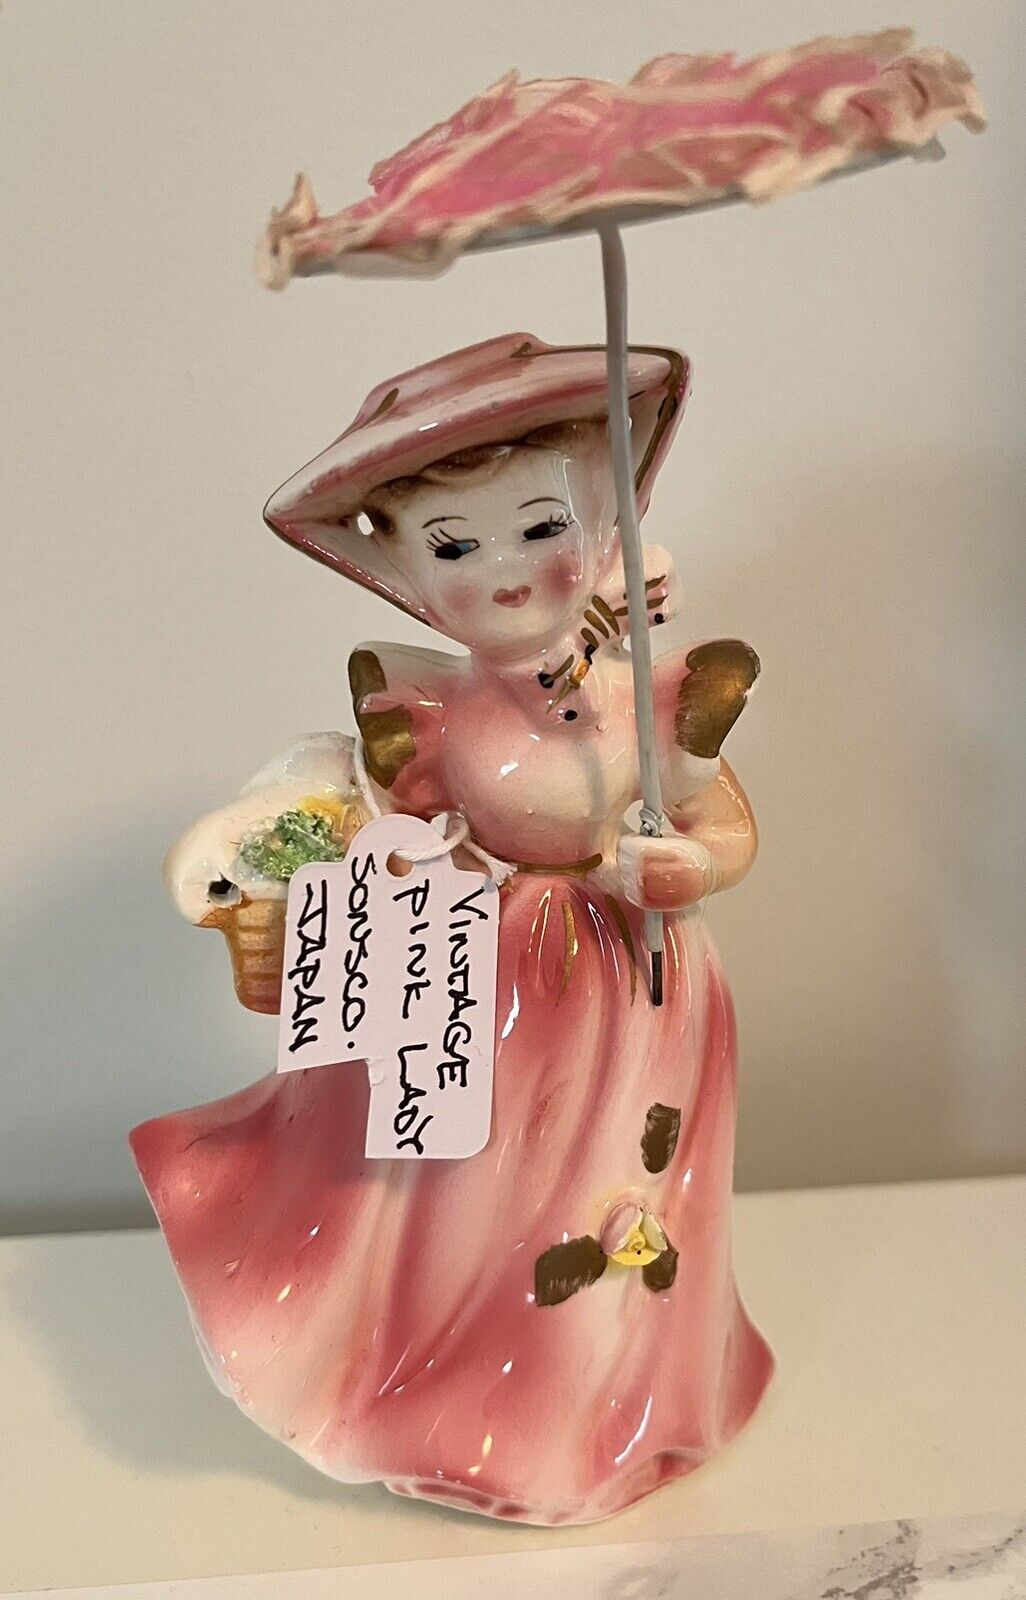 Sonsco Woman Lady Girl Figurine Hand Painted Pink Dress Ceramic Japan Antique